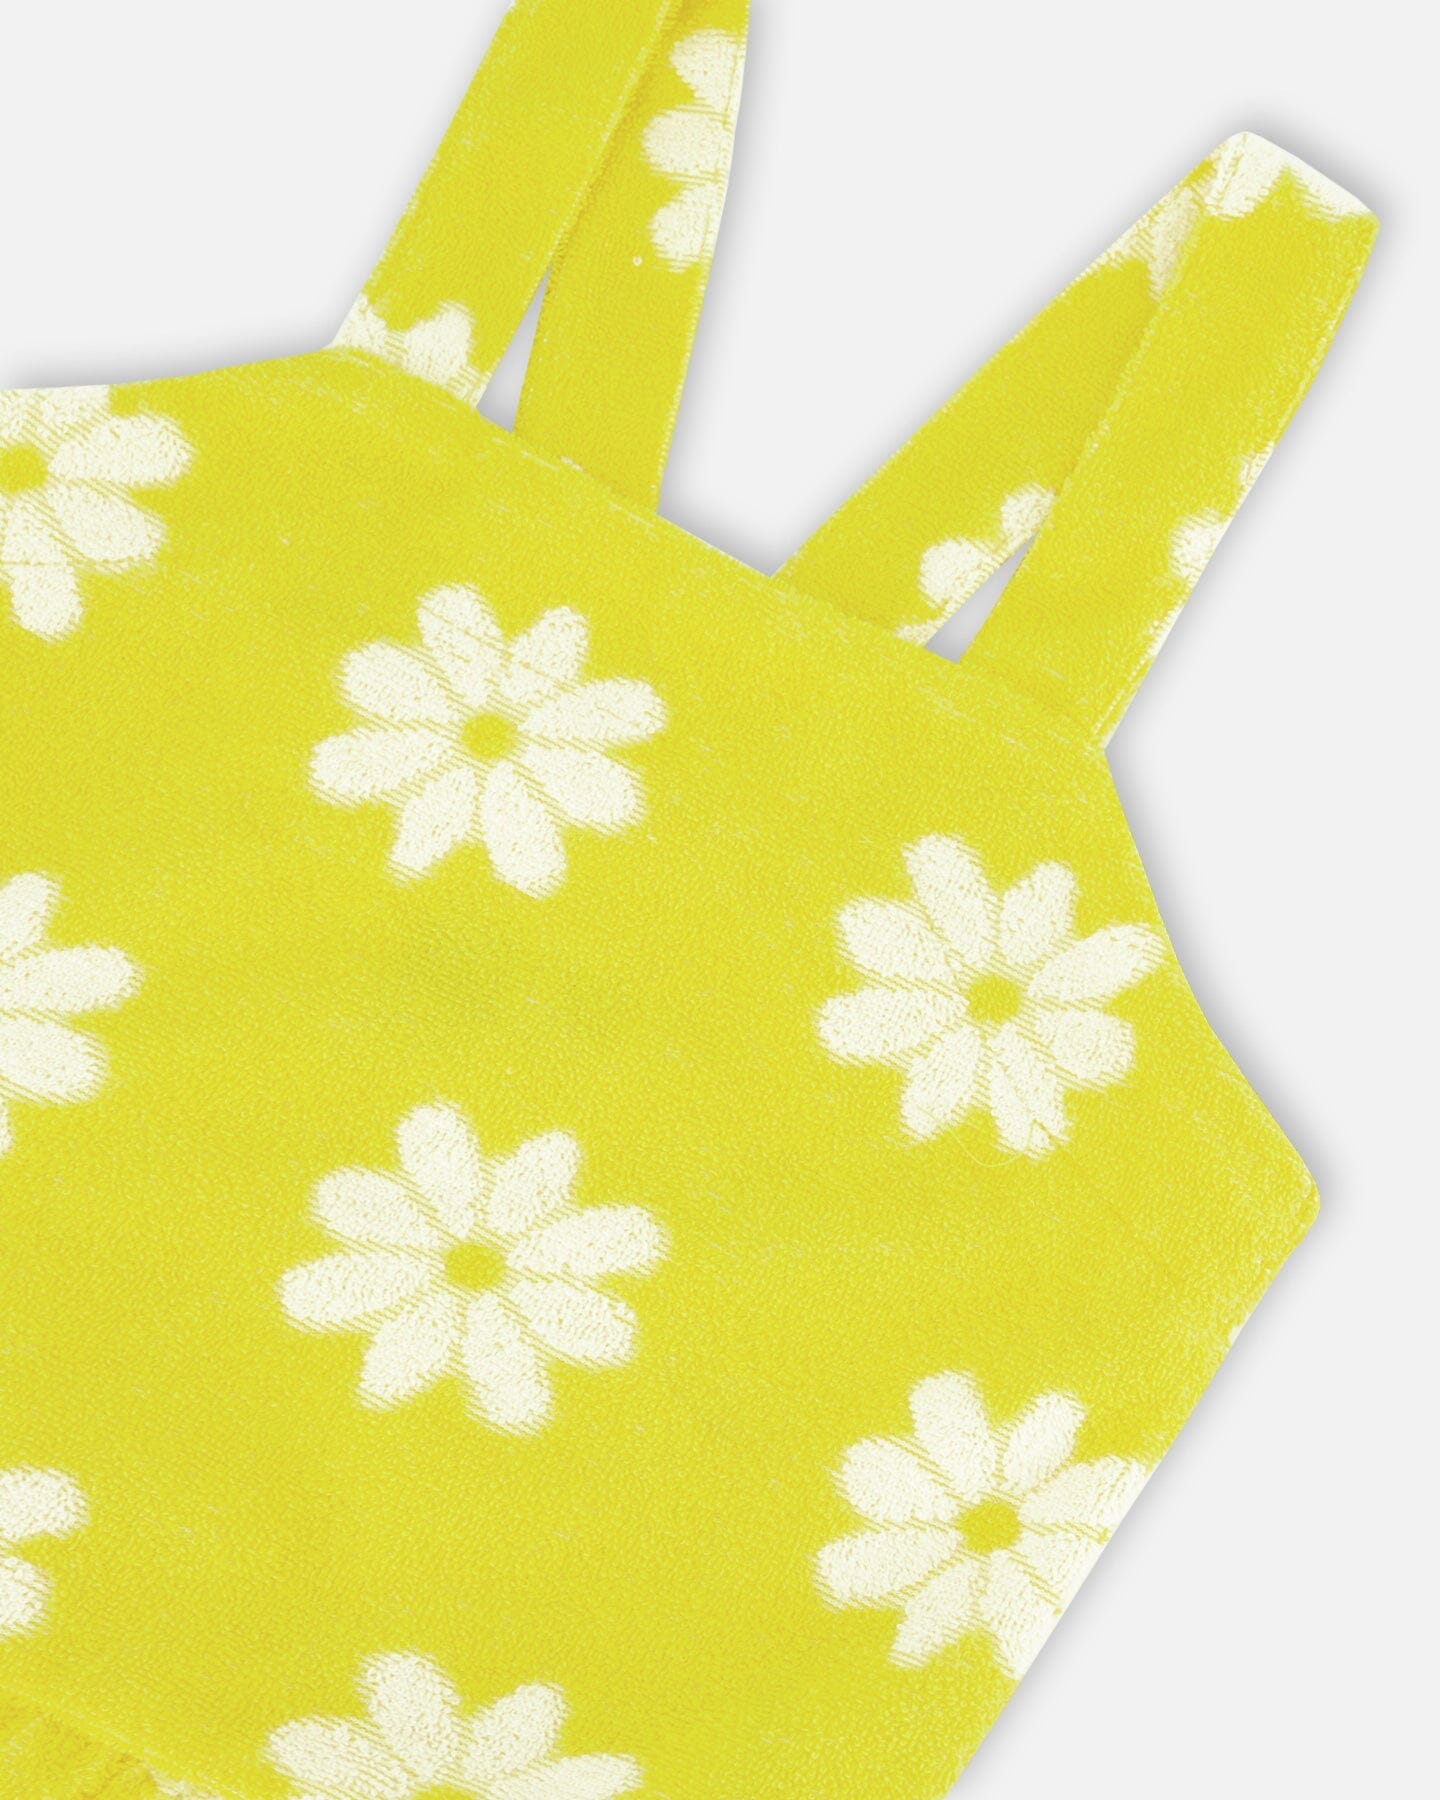 Terry Cloth Tank Top And Short Set Yellow Printed Daisies - F30YG10_215